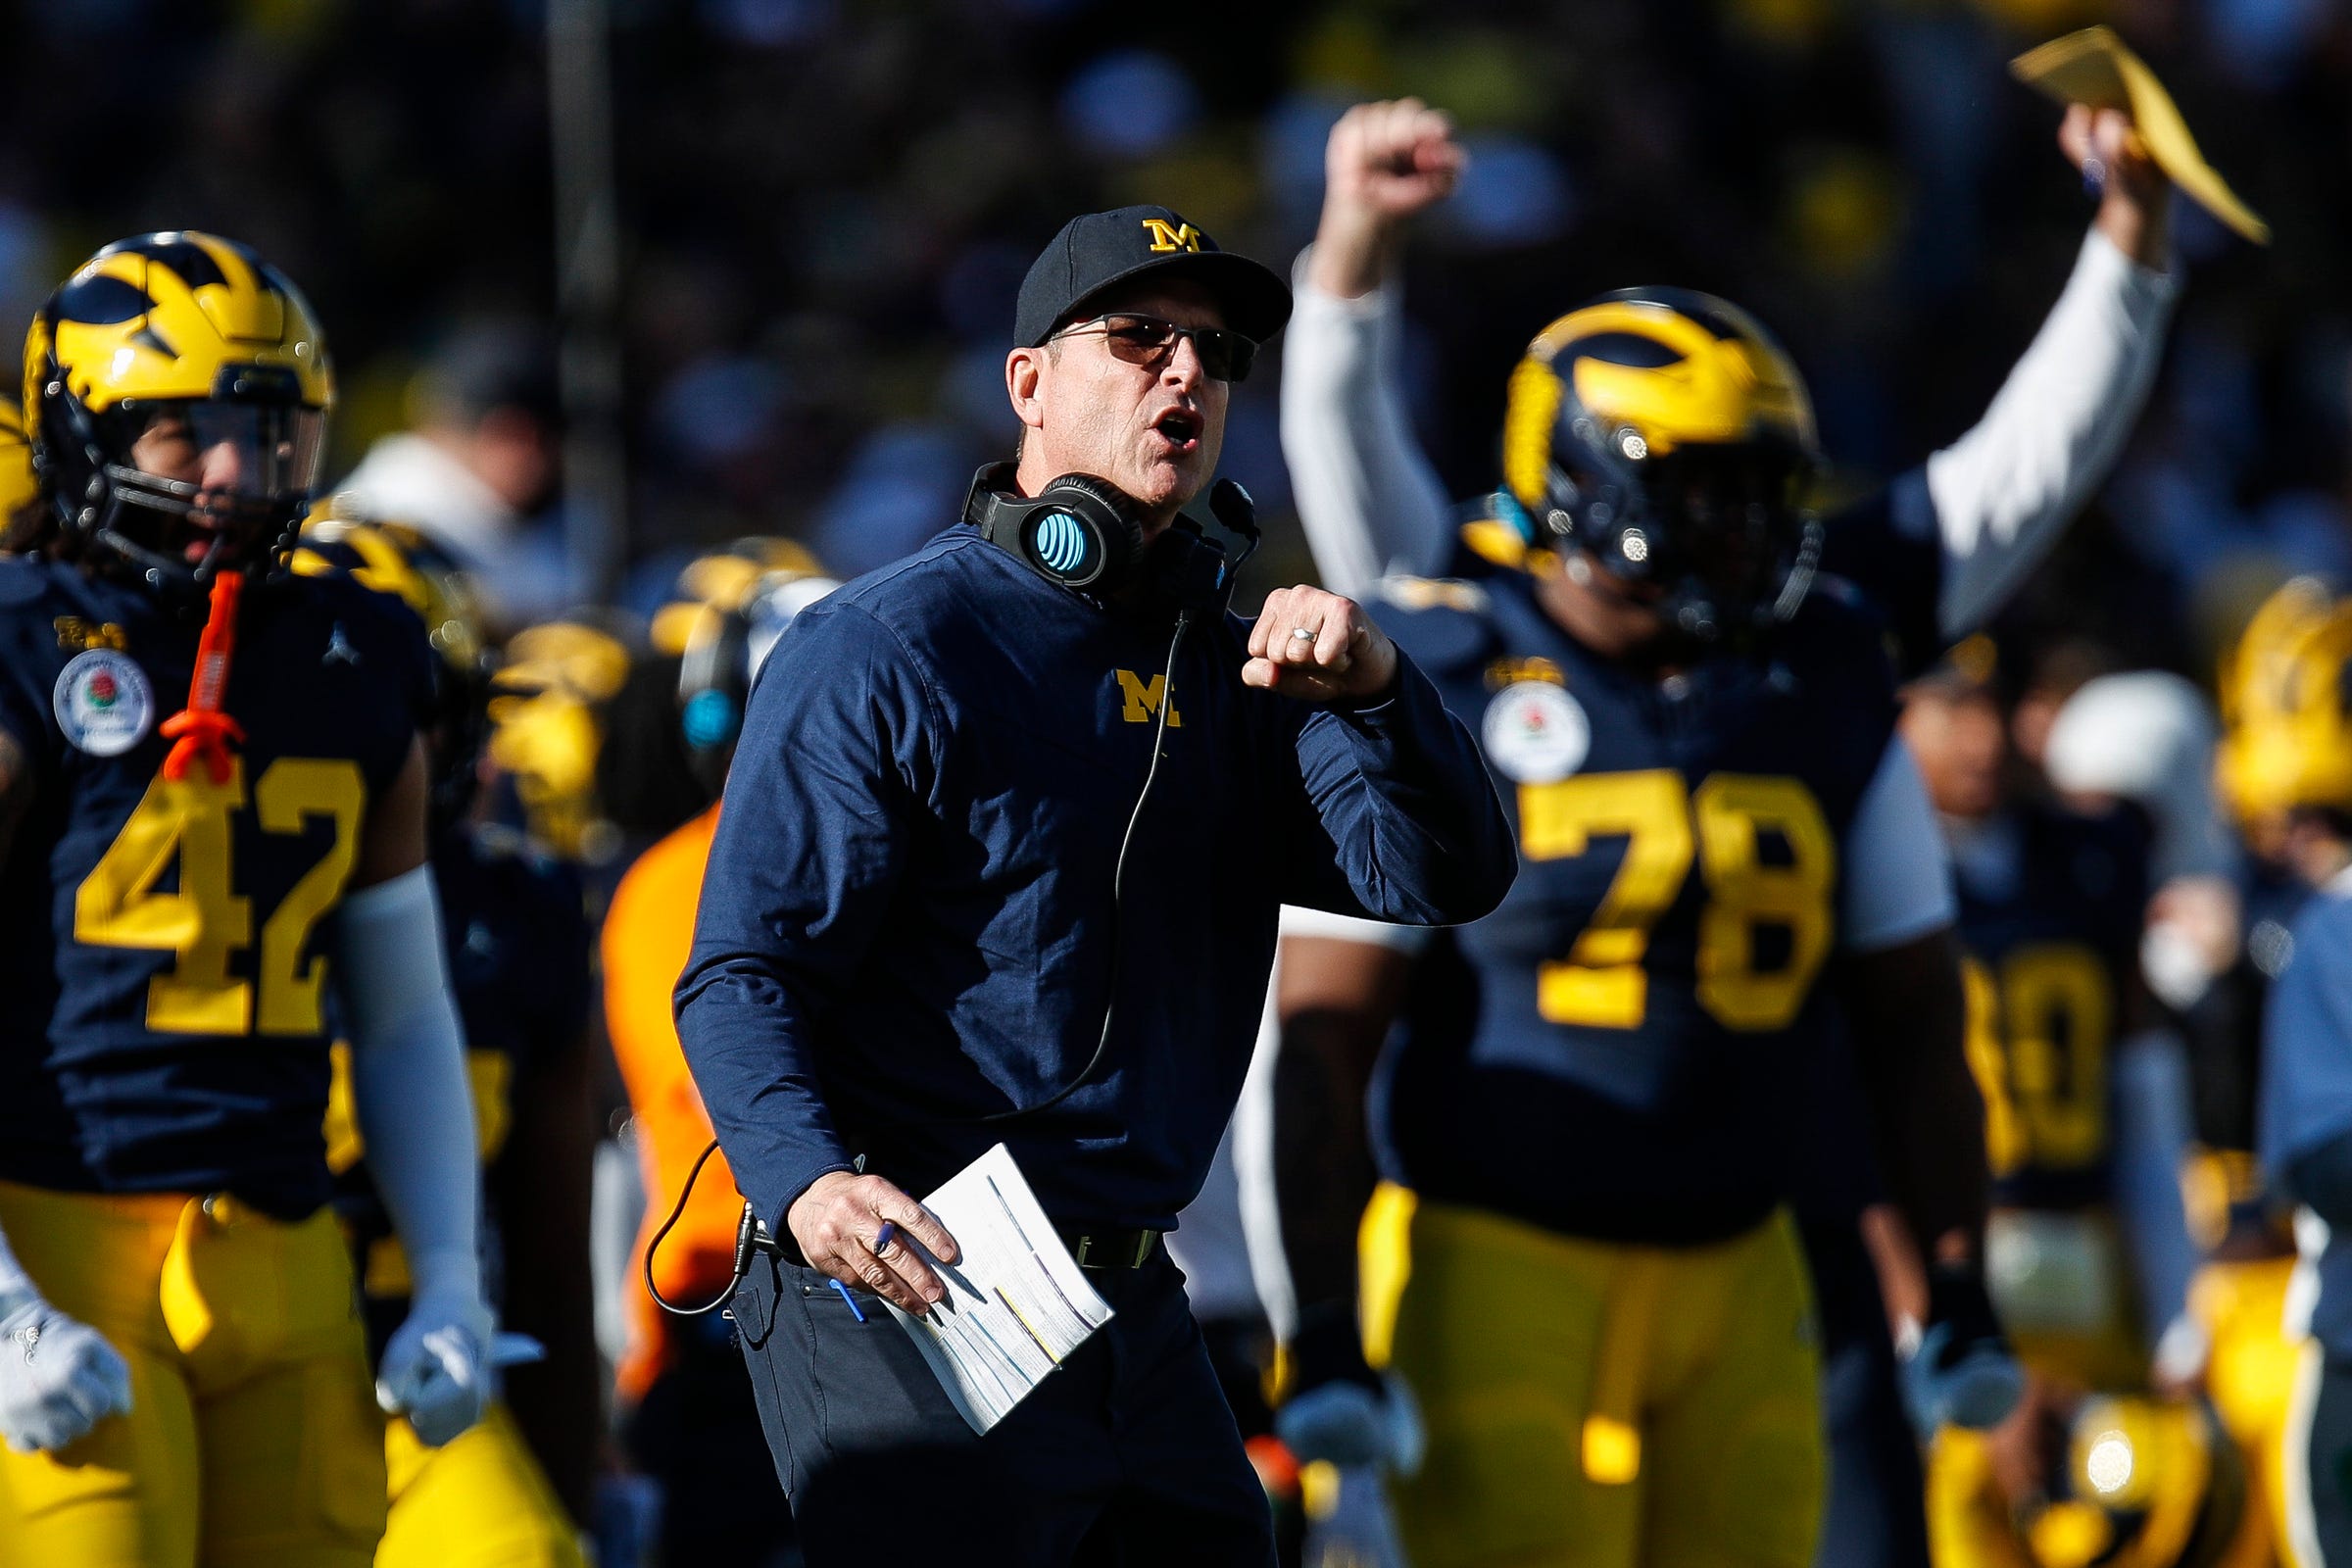 Michigan coach Jim Harbaugh reacts to a play during the Rose Bowl